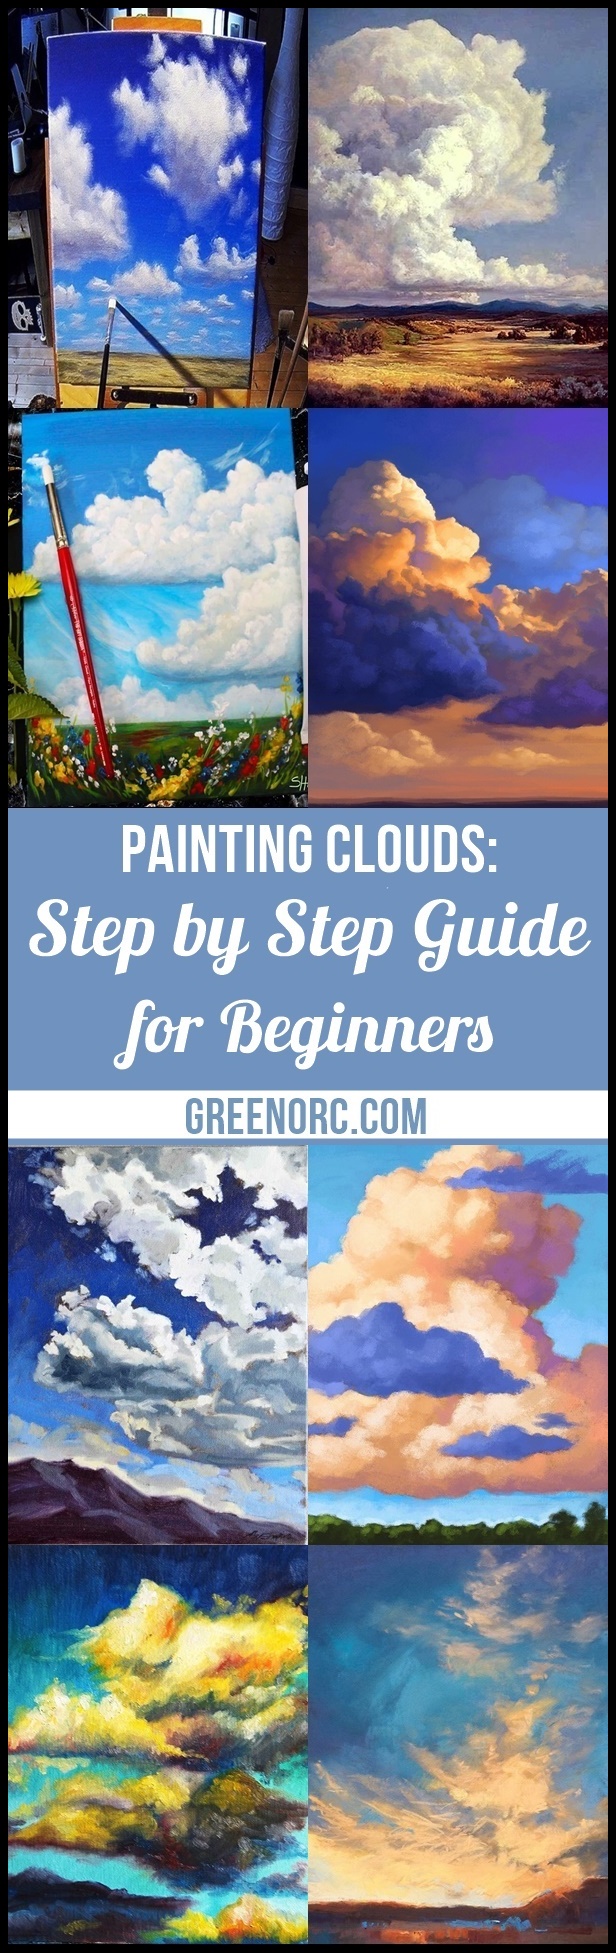 Painting Clouds: Step by Step Guide for Beginners